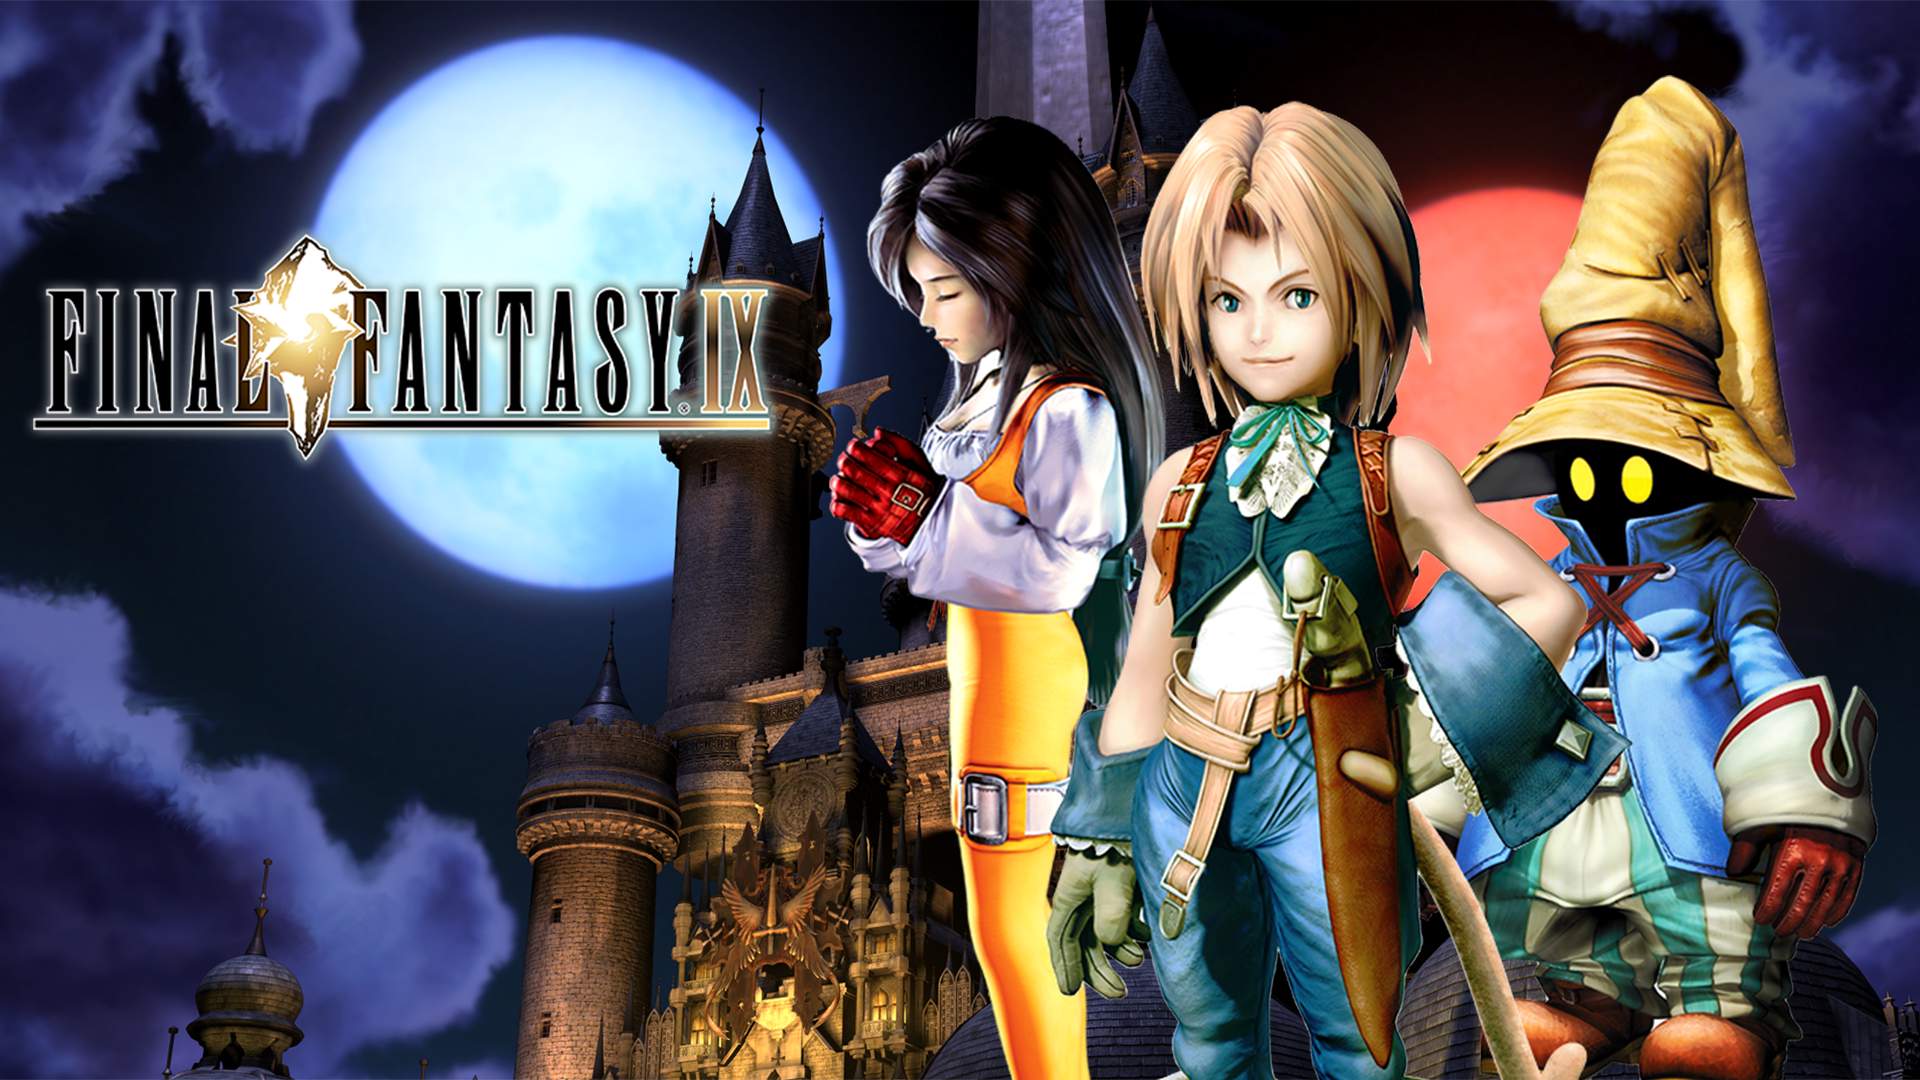 What's so good about FINAL FANTASY IX?